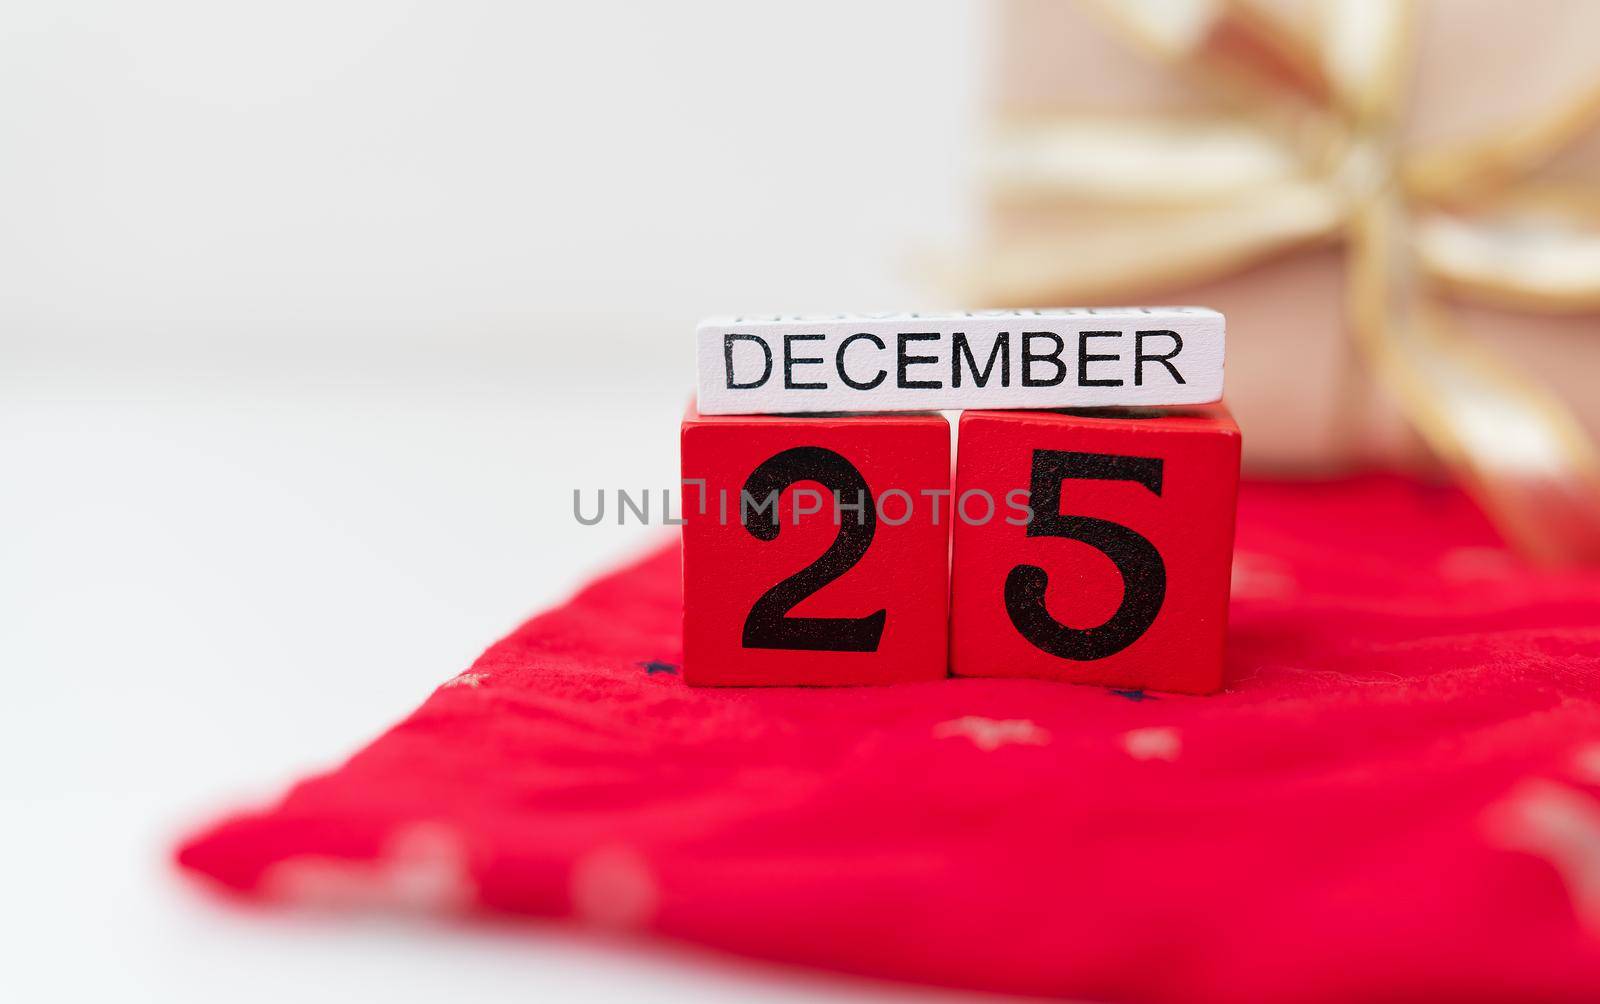 December 25 is lined with red cubes along with December lettering on a red Christmas background. Christmas Eve